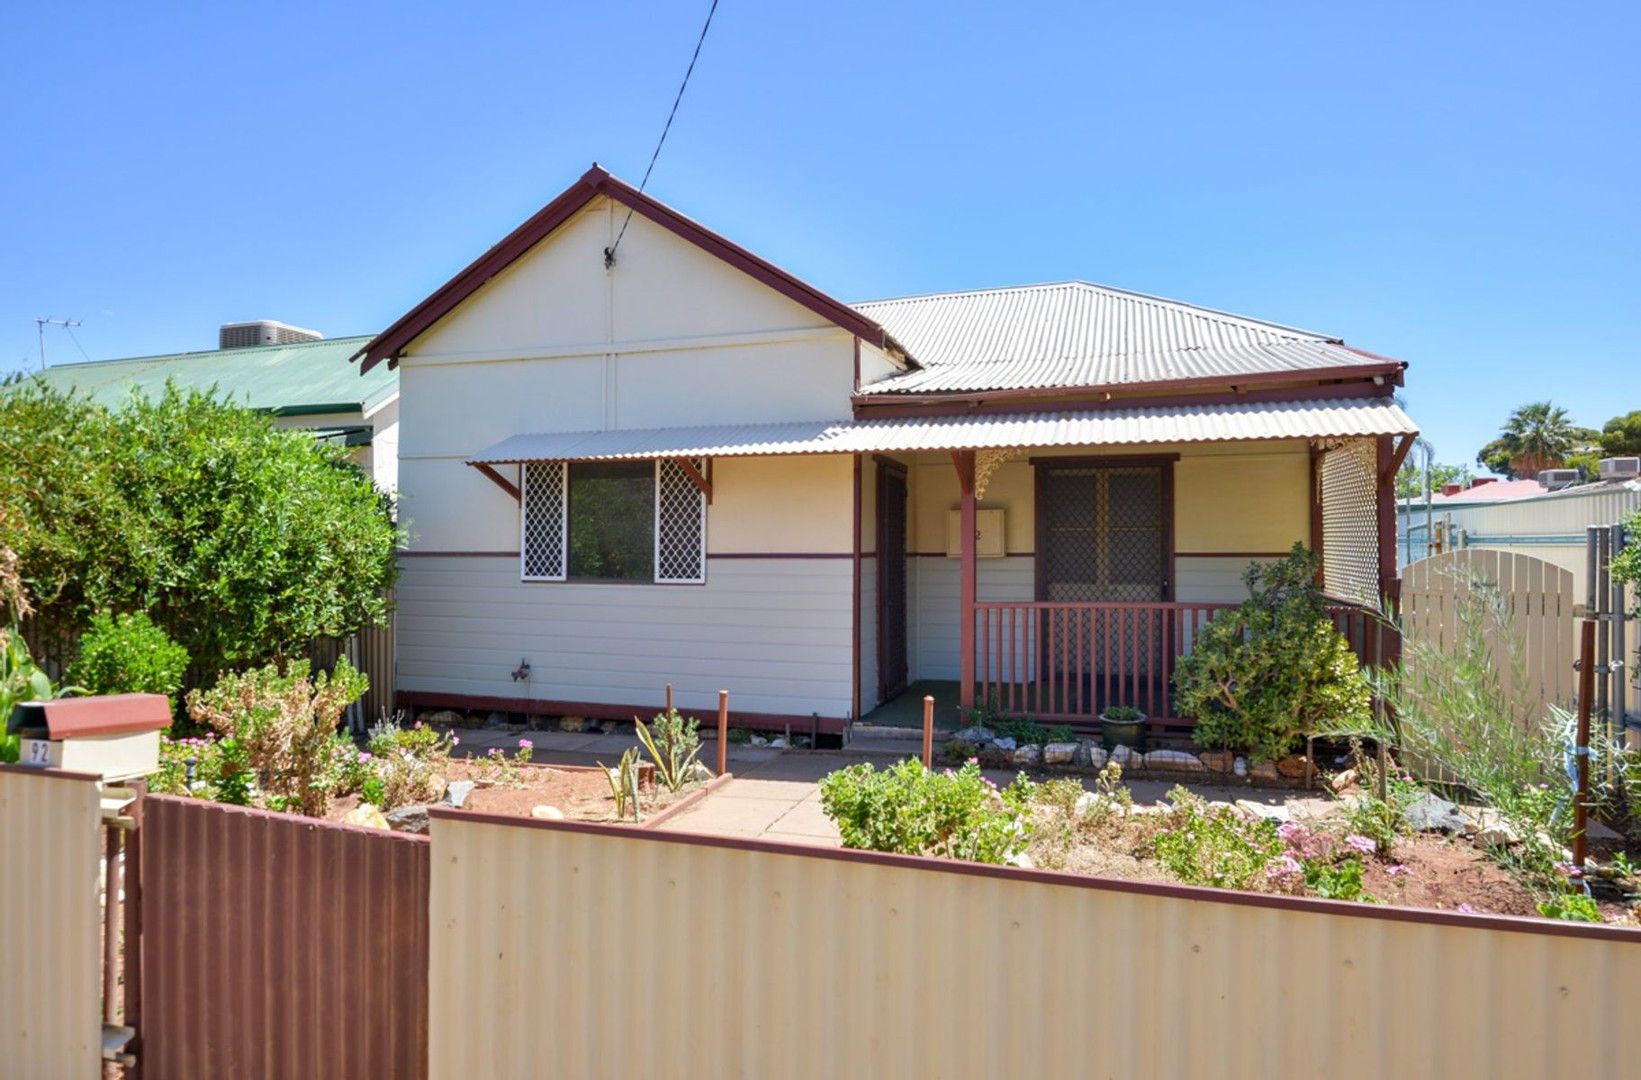 2 bedrooms House in 92 Bourke Street PICCADILLY WA, 6430